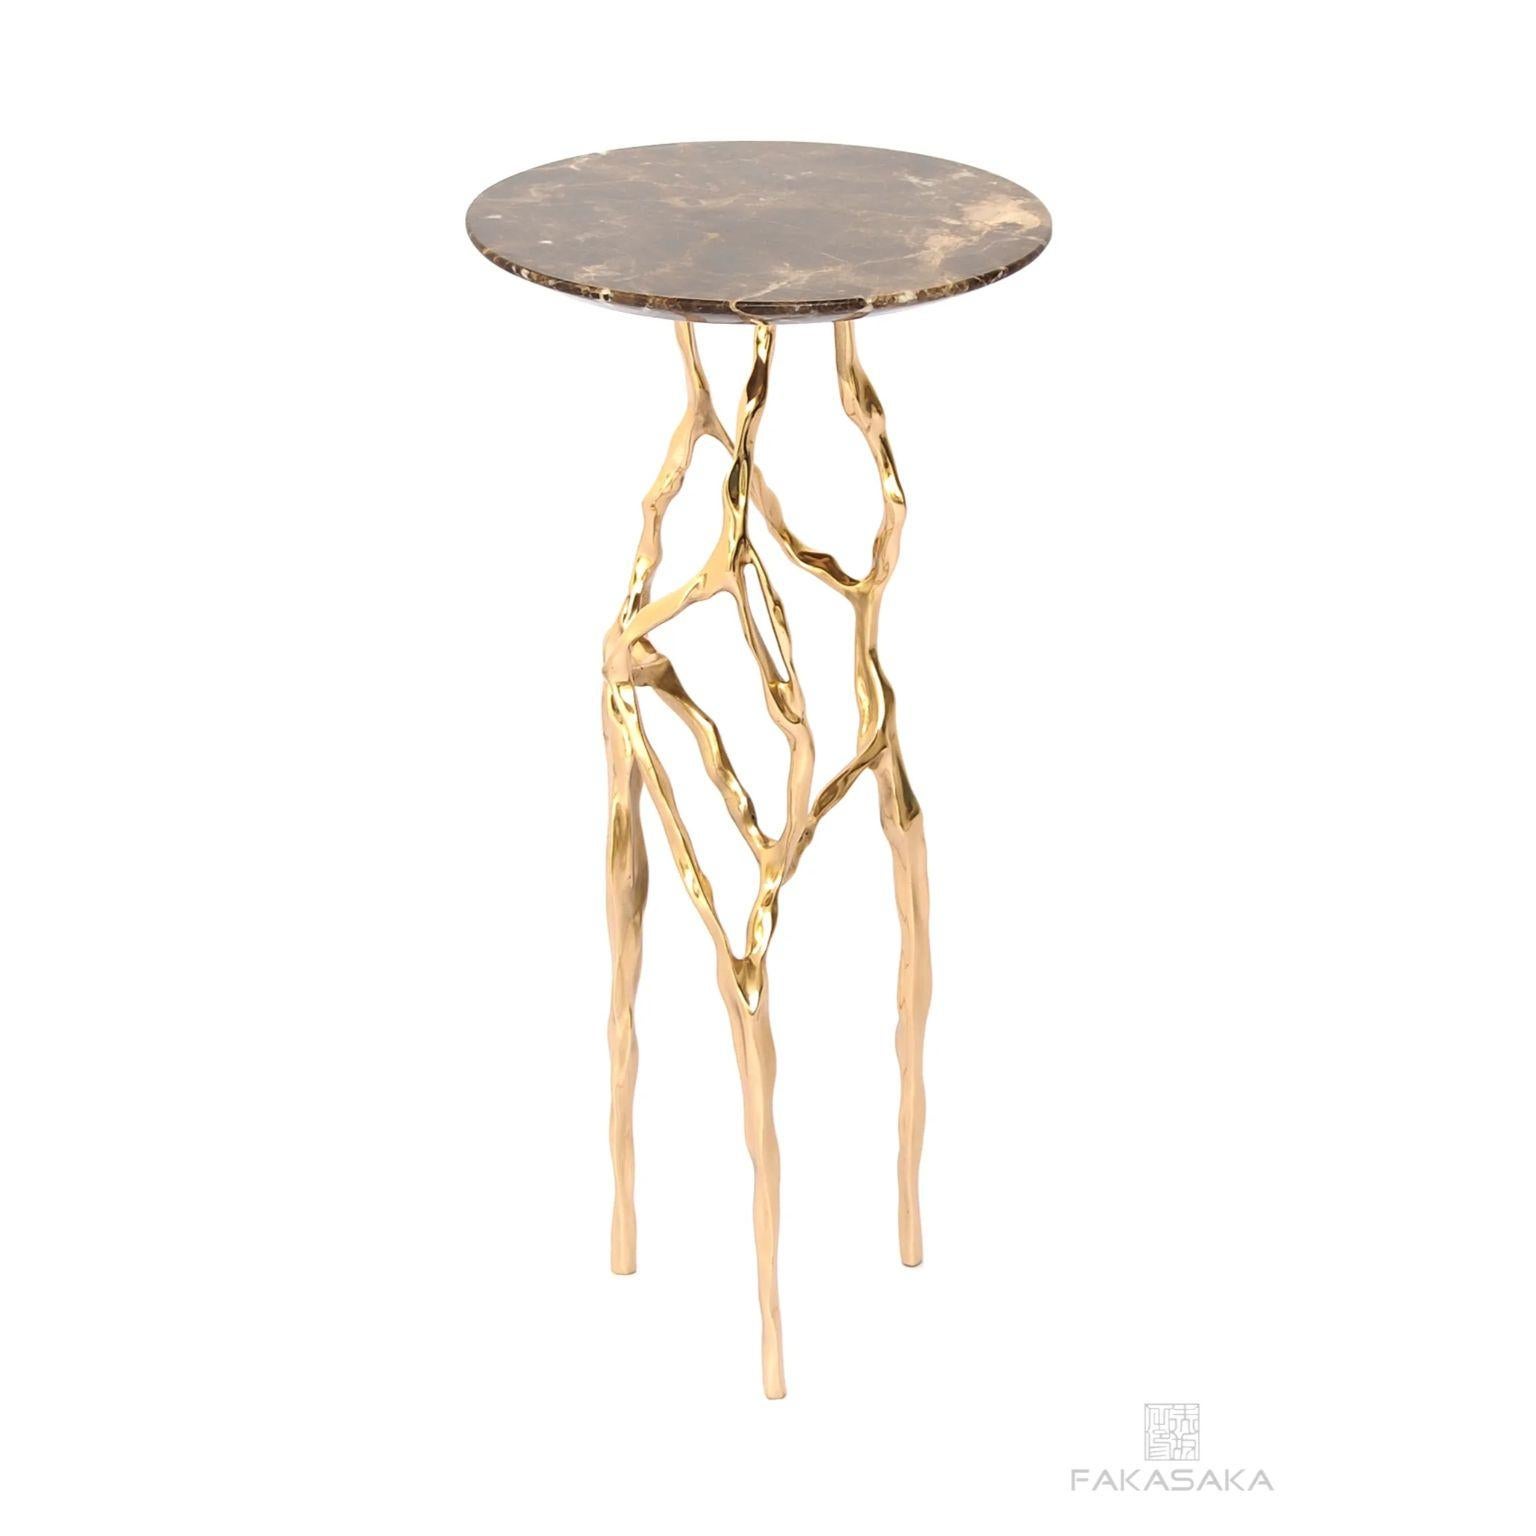 Brazilian Sid Drink Table with Marrom Imperial Marble Top by Fakasaka Design For Sale